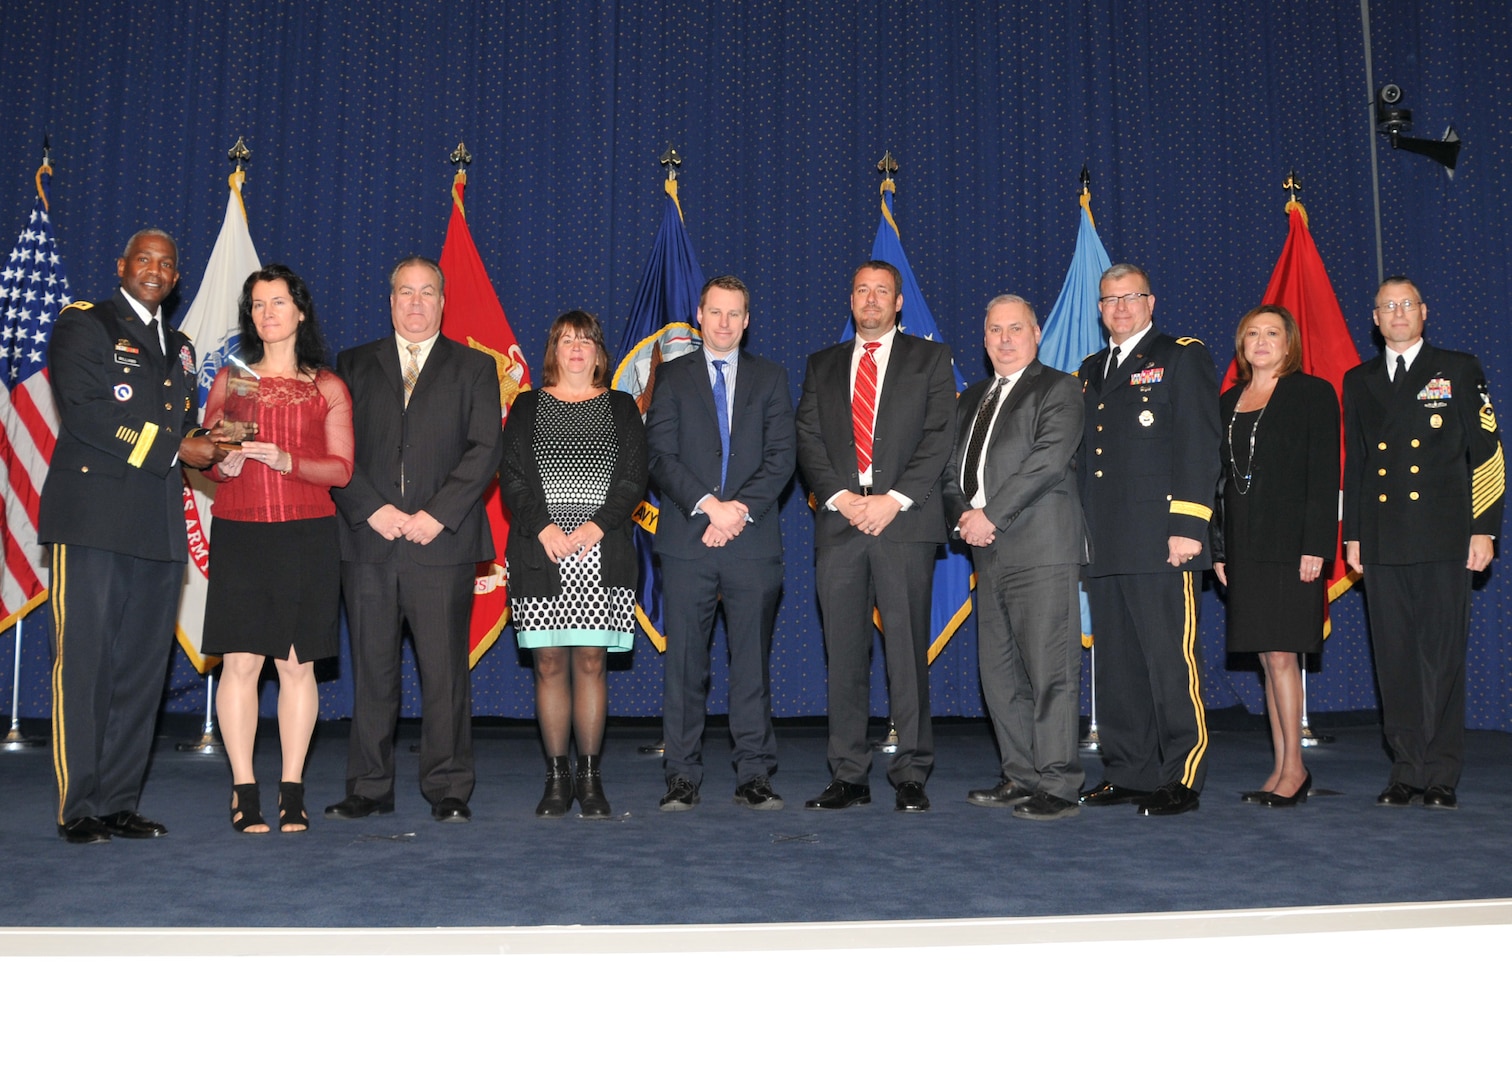 Troop Support earns acquisition, EEO awards at 50th DLA Employee Recognition awards